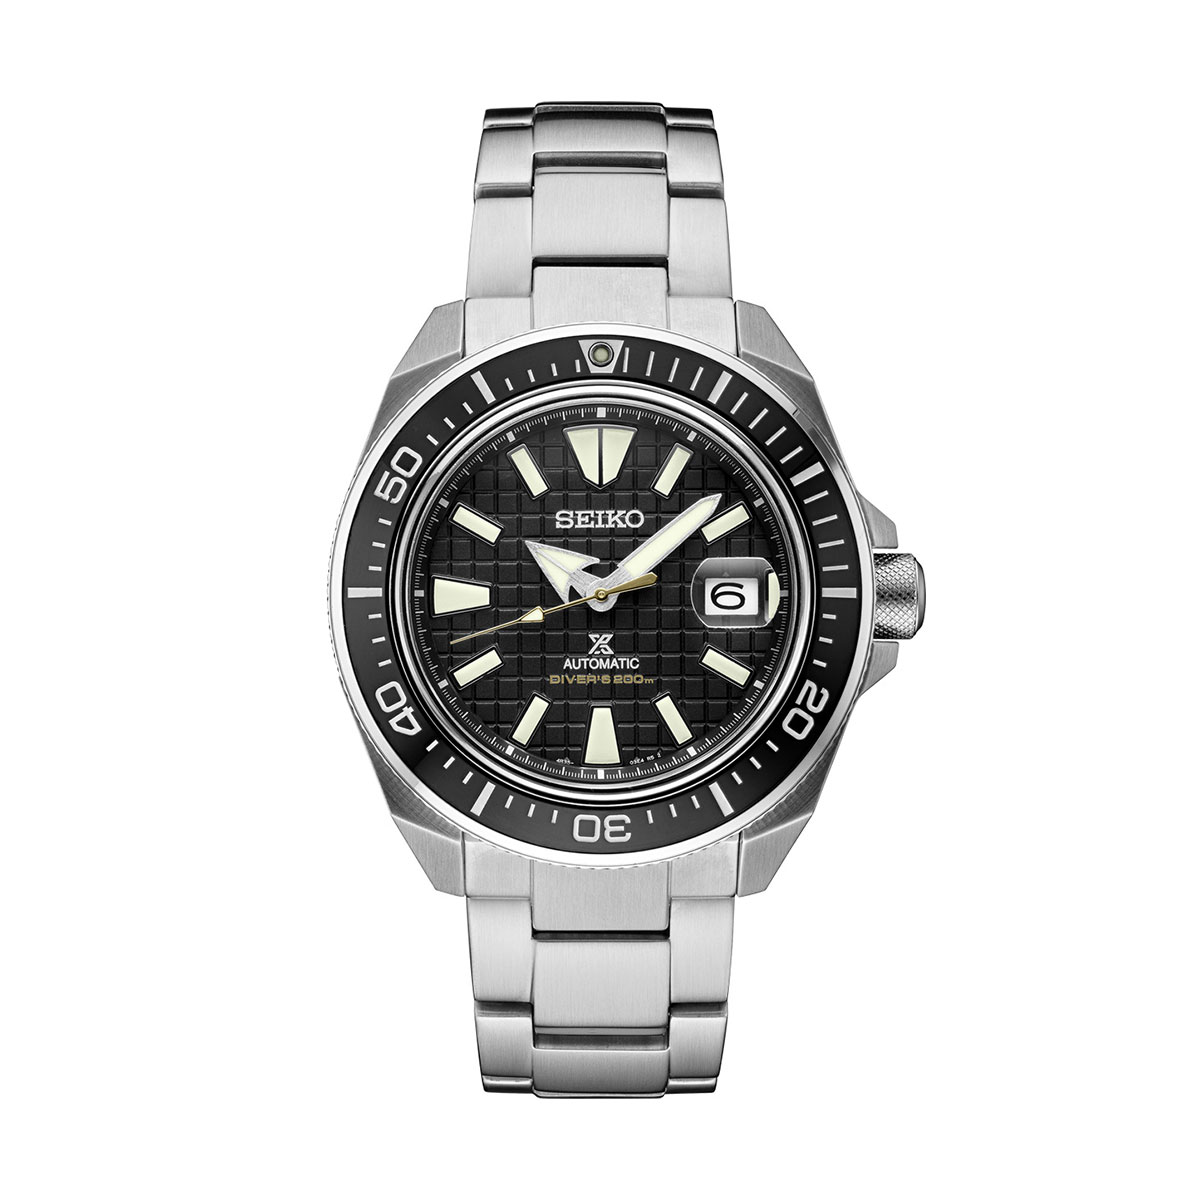 Seiko Prospex 44mm Automatic Diver Stainless Steel Watch, Black Patterned  Dial | SRPE35 | Borsheims